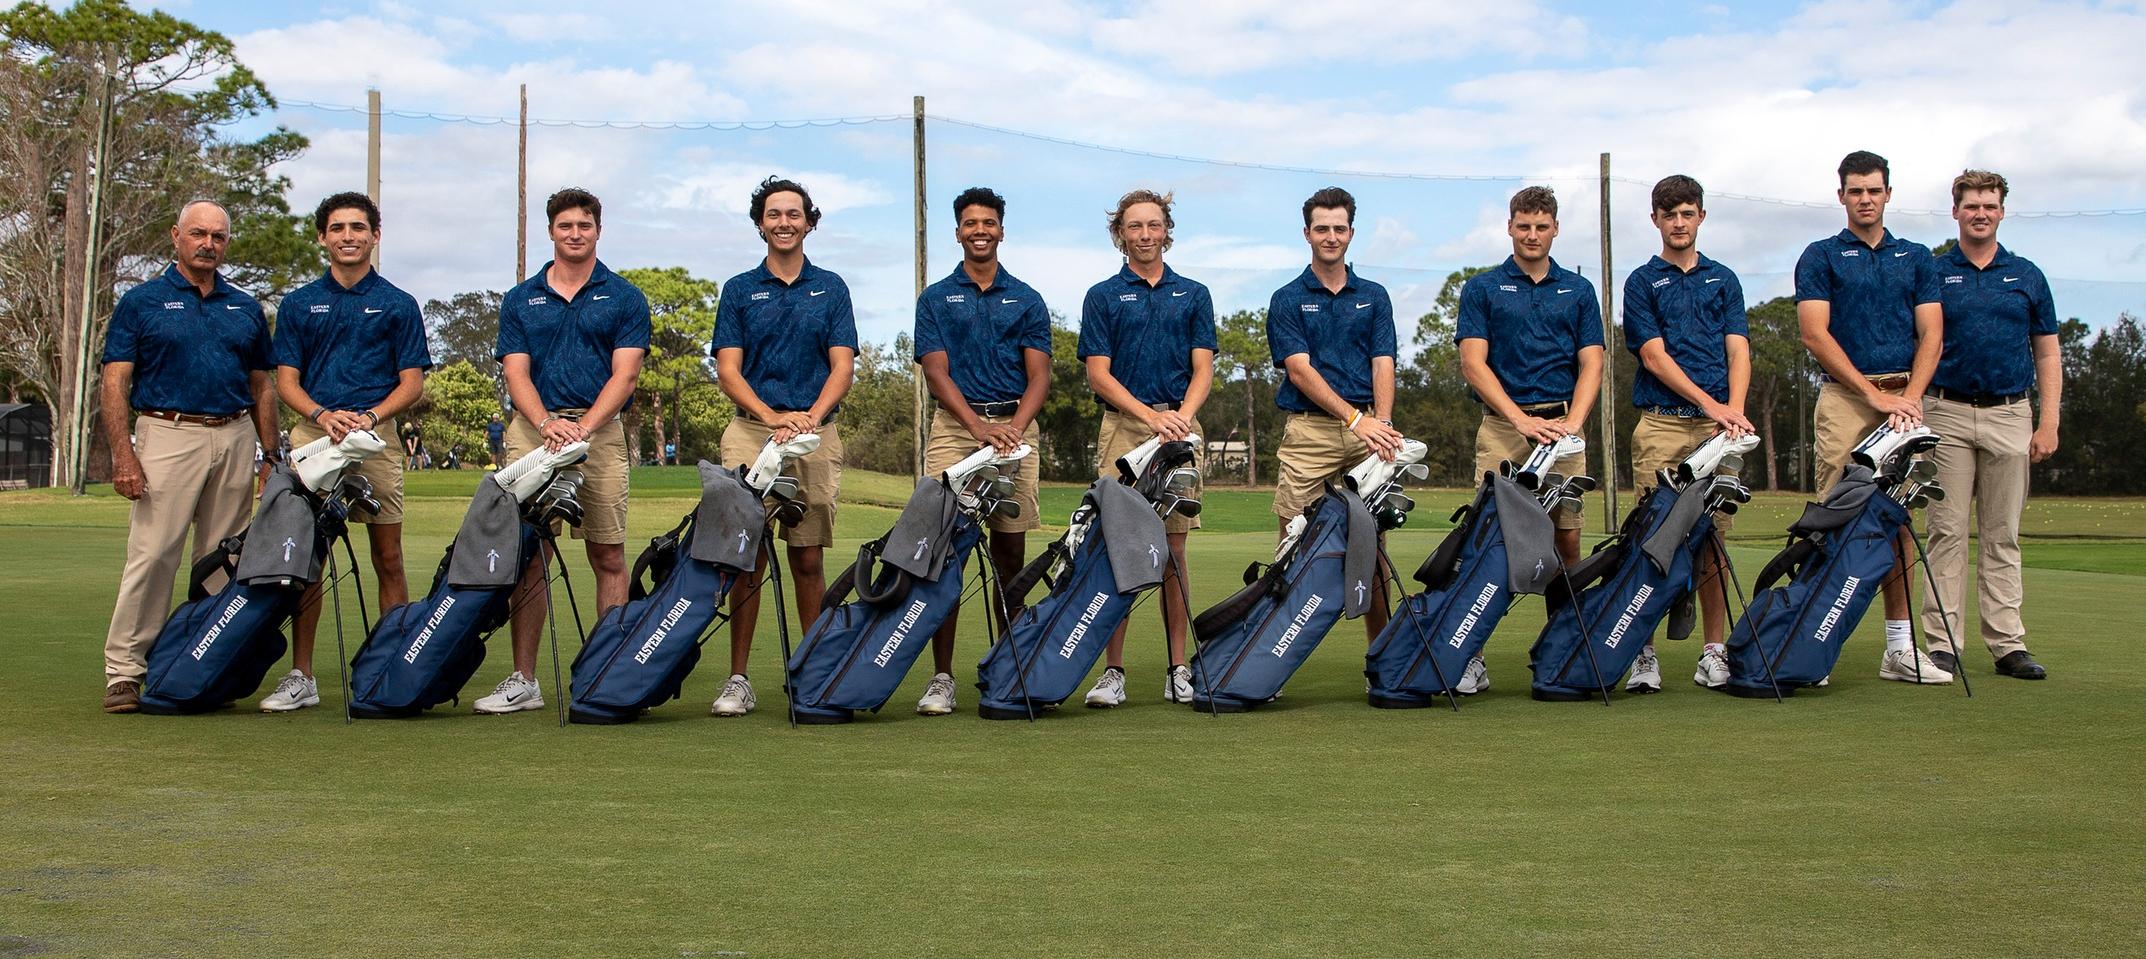 Men's golf team places 14th at national tournament